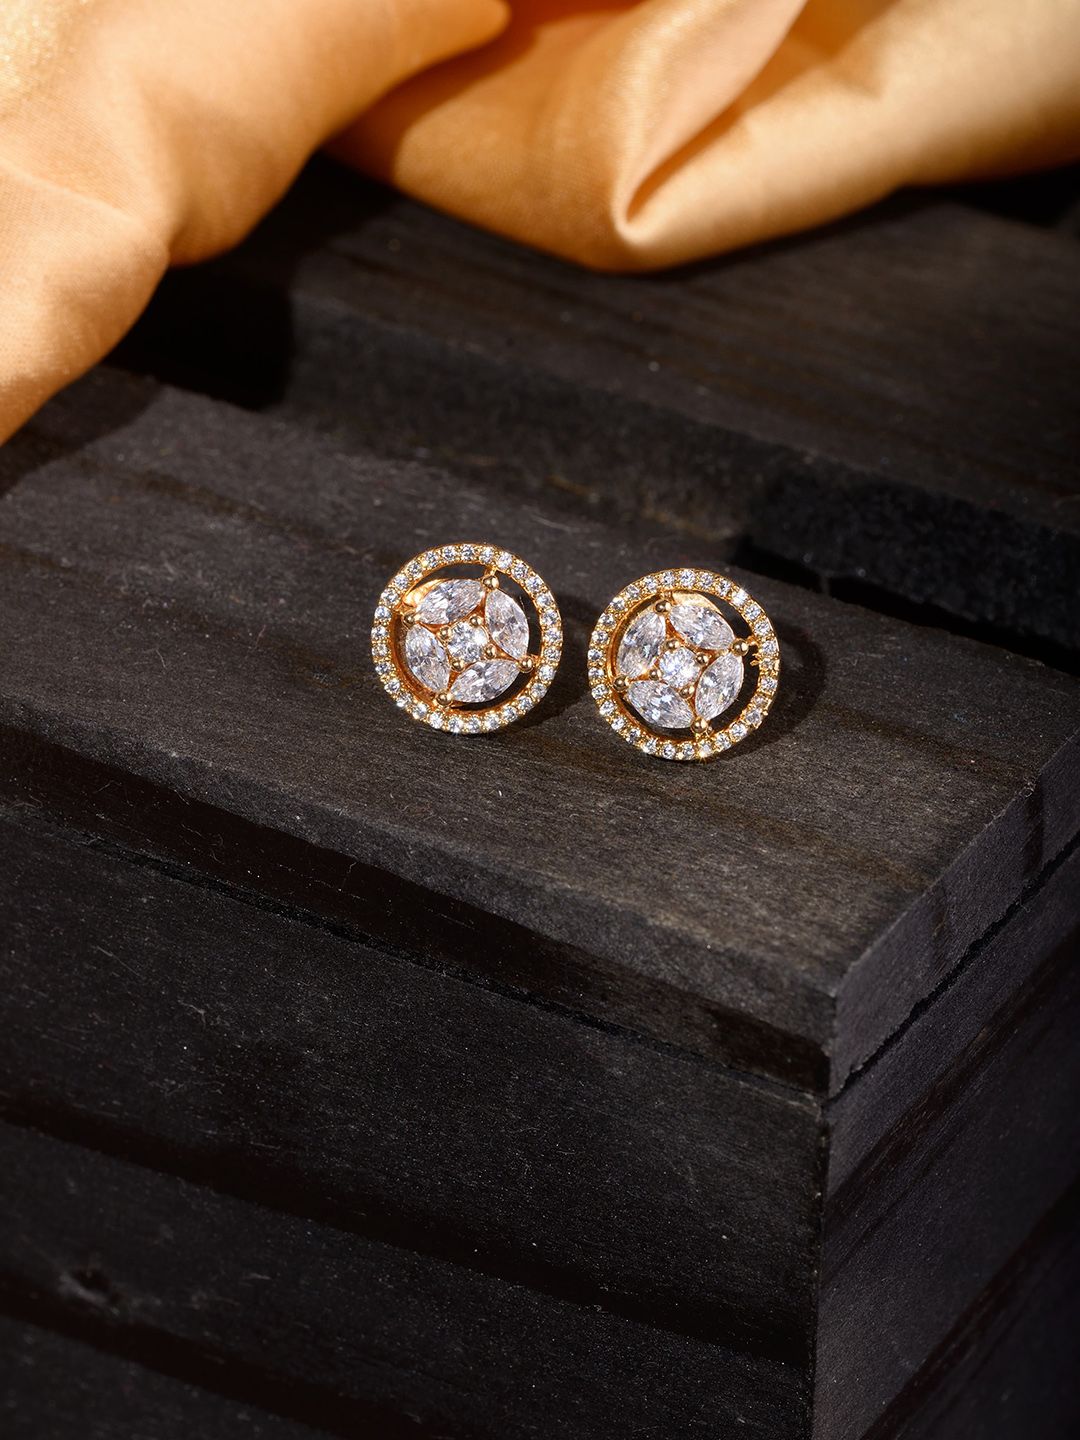 Saraf RS Jewellery Gold-Plated & White AD Studded Contemporary Studs Earrings Price in India